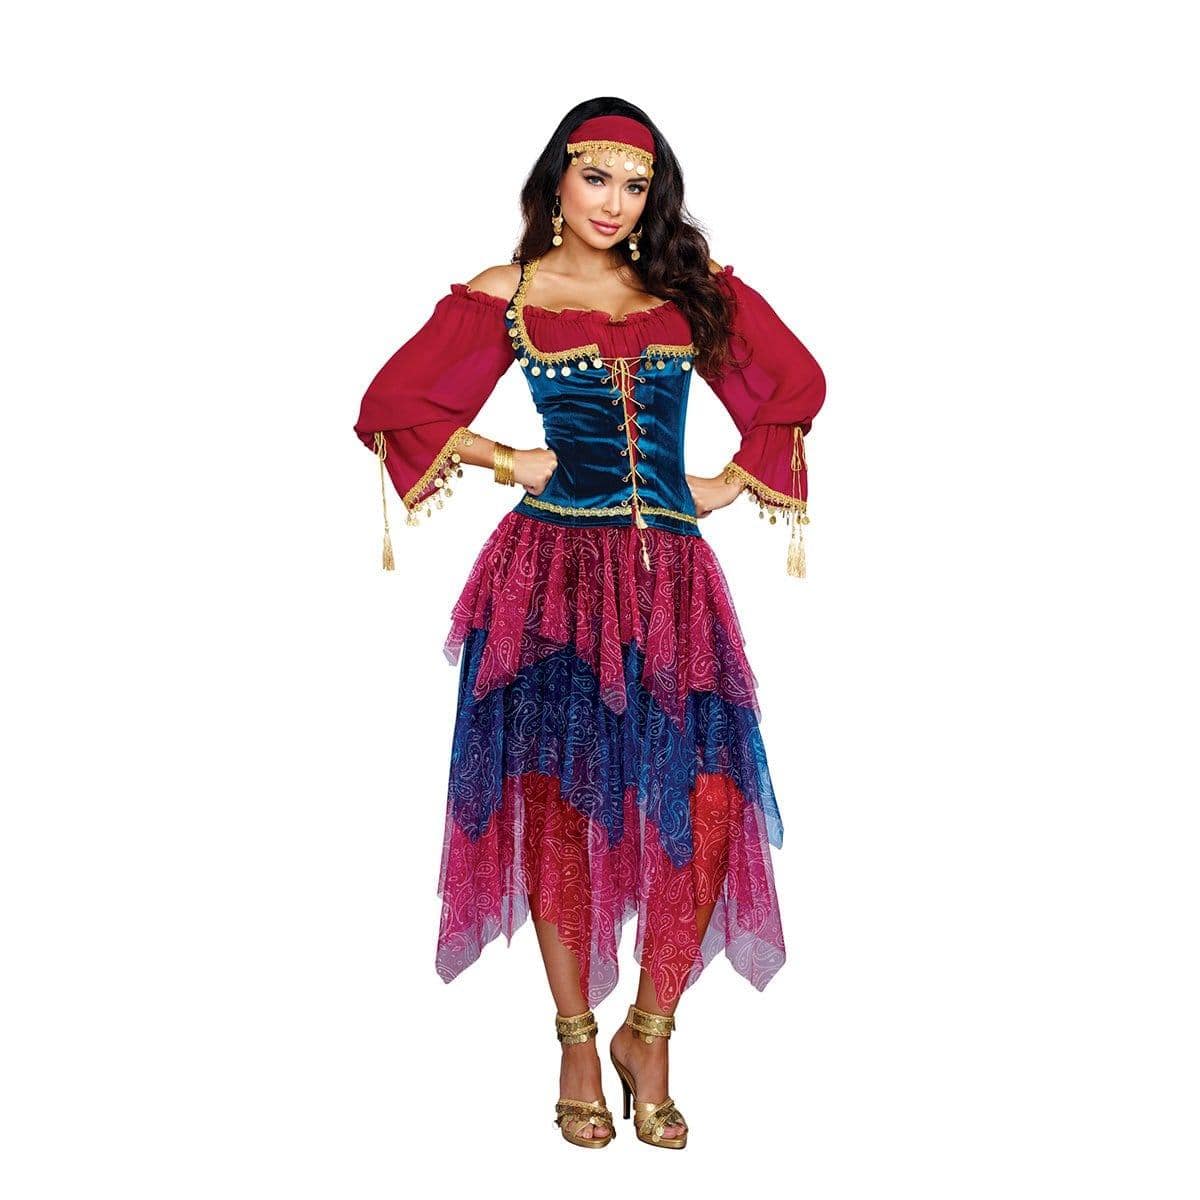 Party Expert - Party Supplies & Costumes